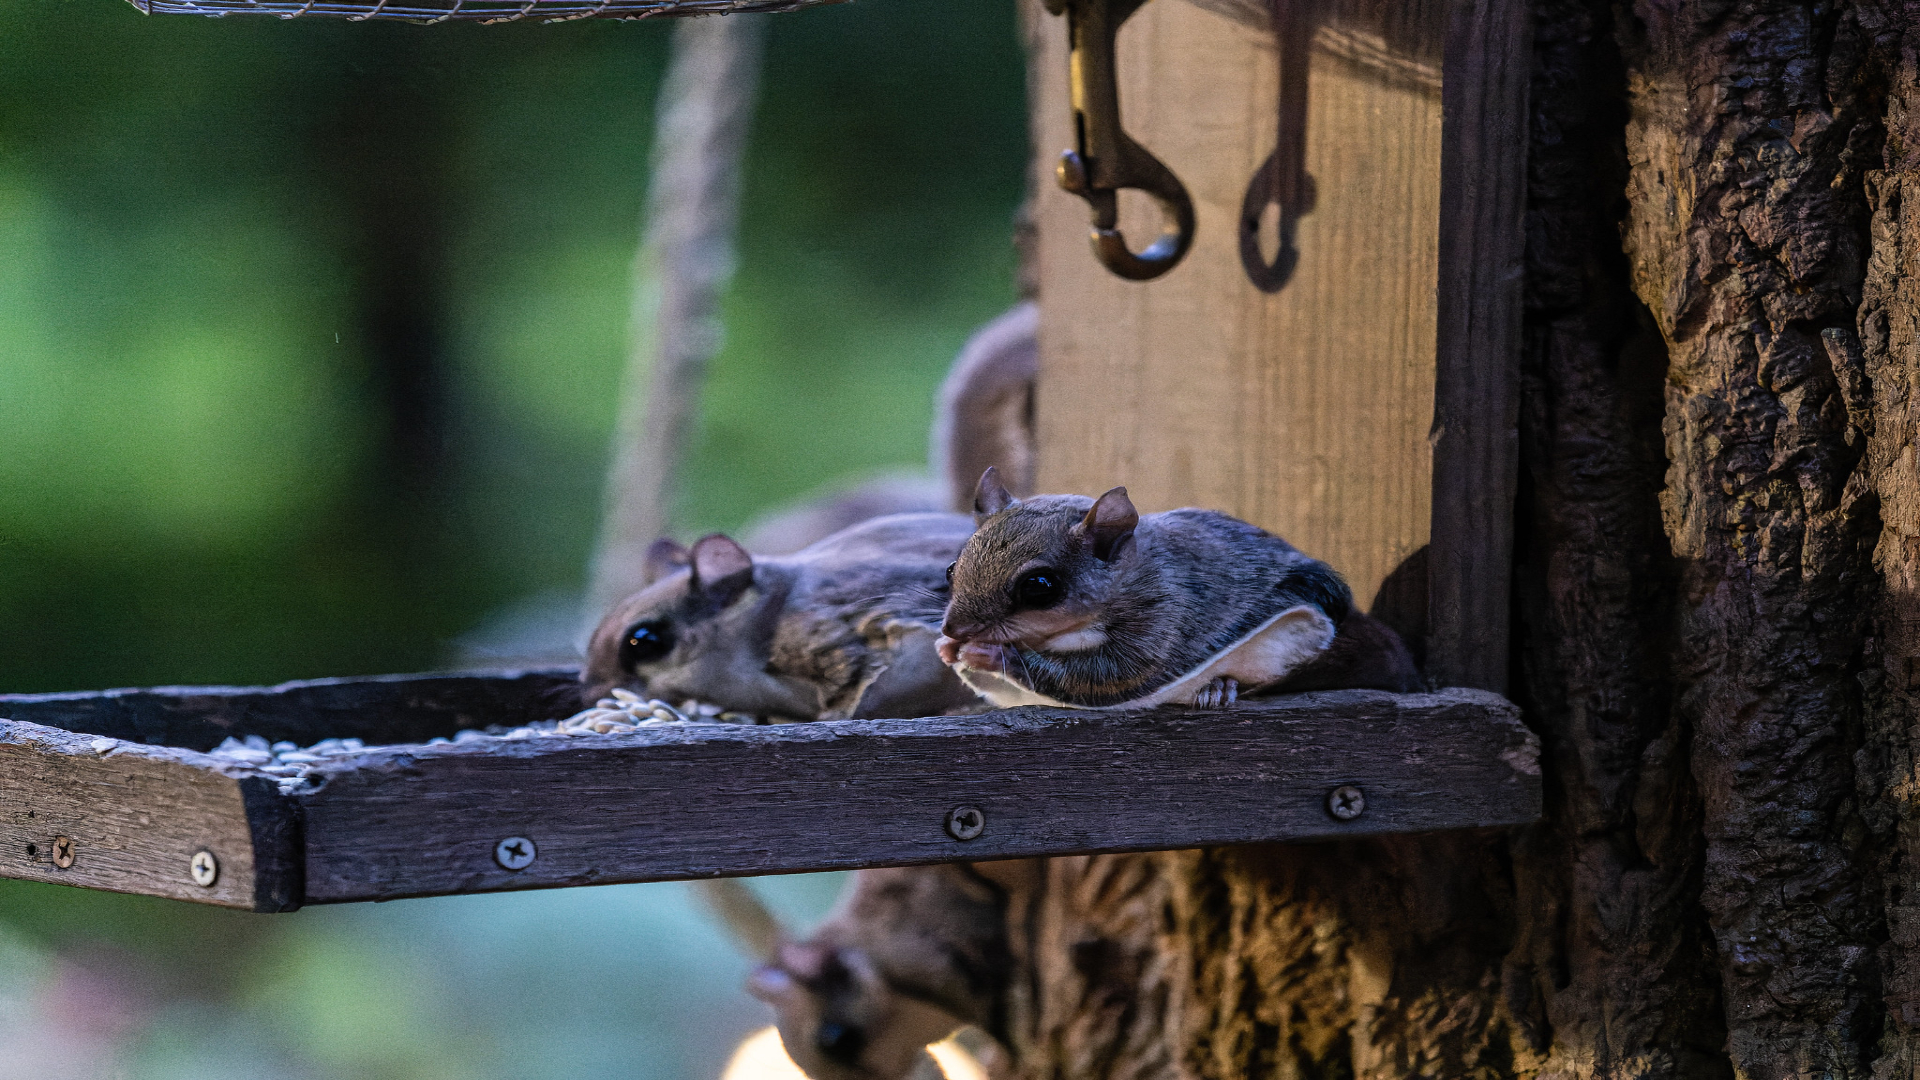 Two flying squirrels eat sunflower seeds on a hanging feeder.